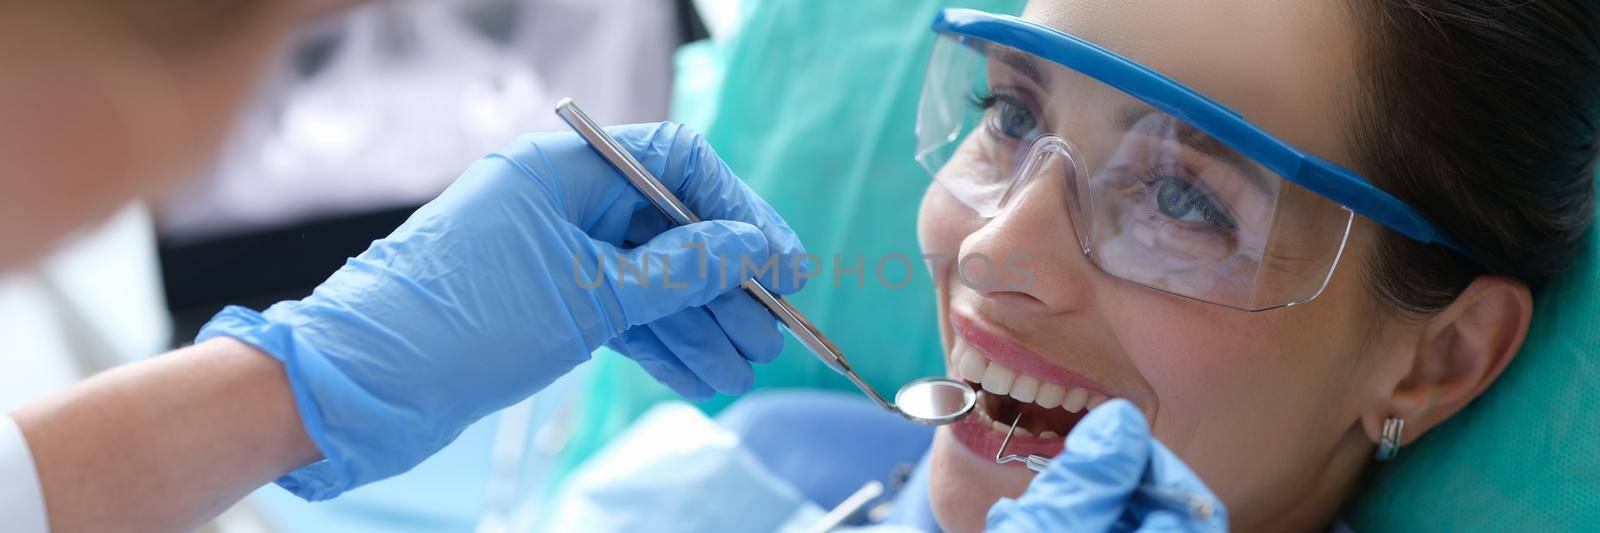 Doctor examining oral cavity of female patient using dental instruments in clinic. Annual preventive dental checkups concept